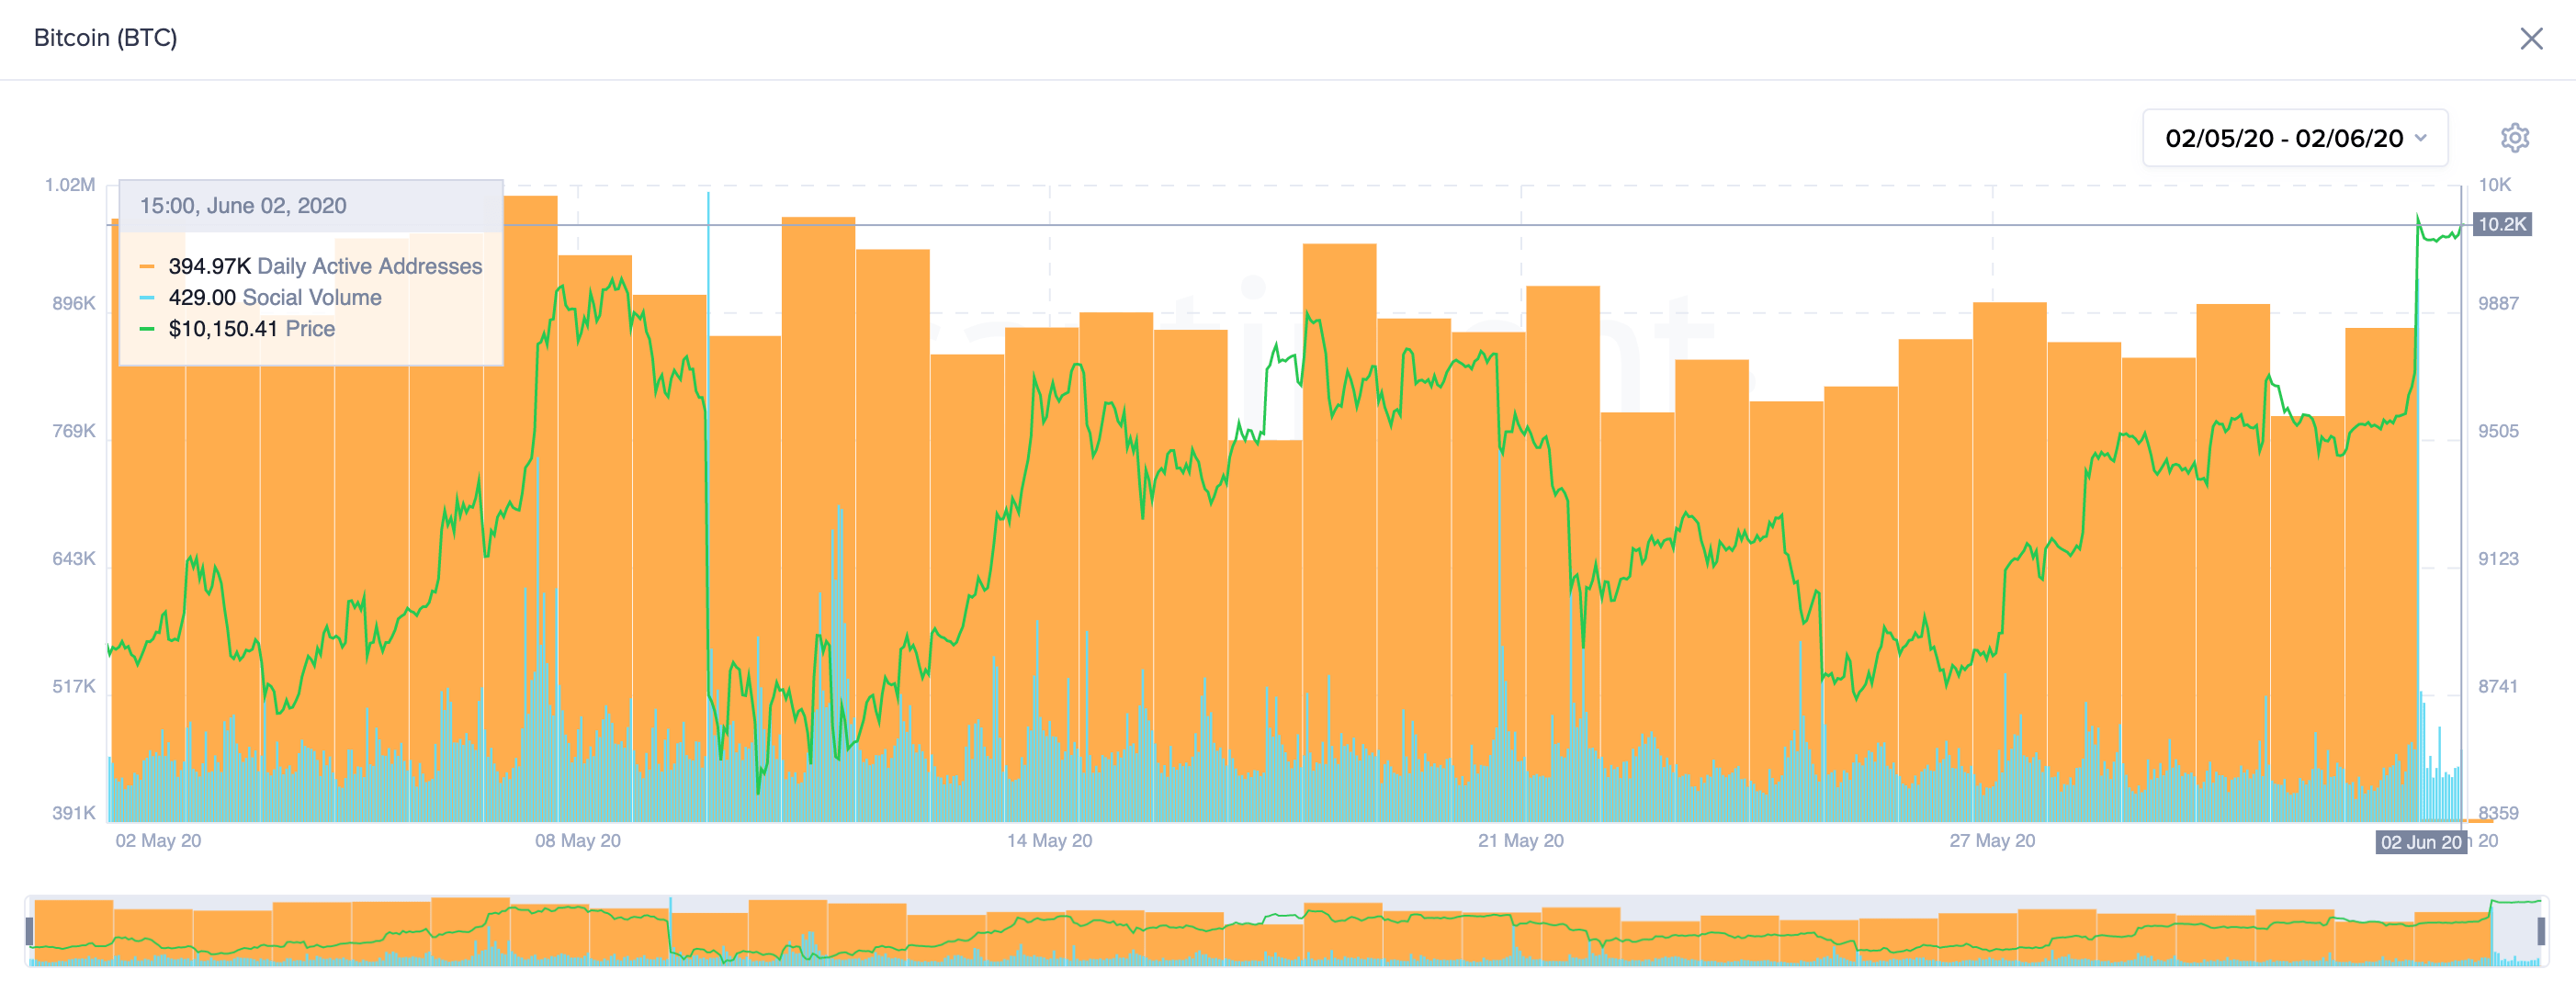 Bitcoin Daily Active Addresses and Social Volume. (Source: Santiment)